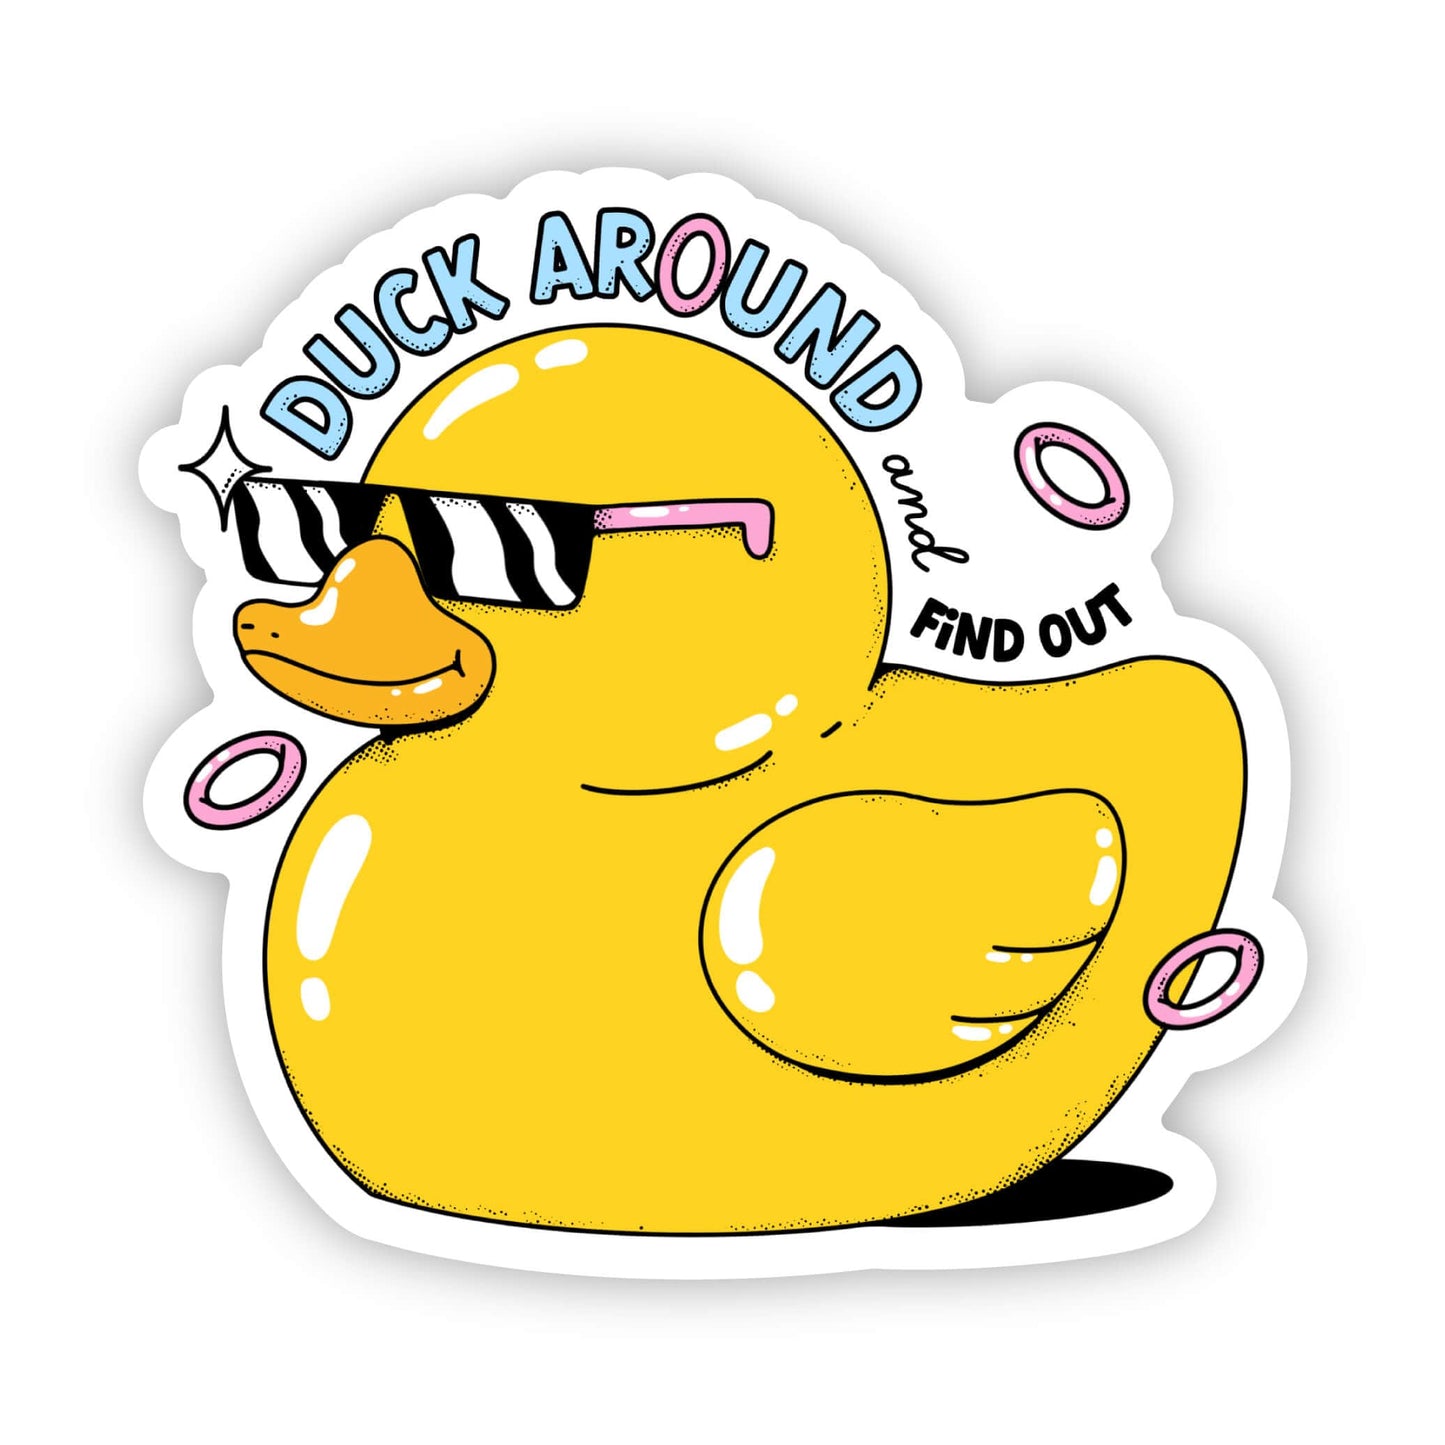 "Duck around and find out" rubber duck